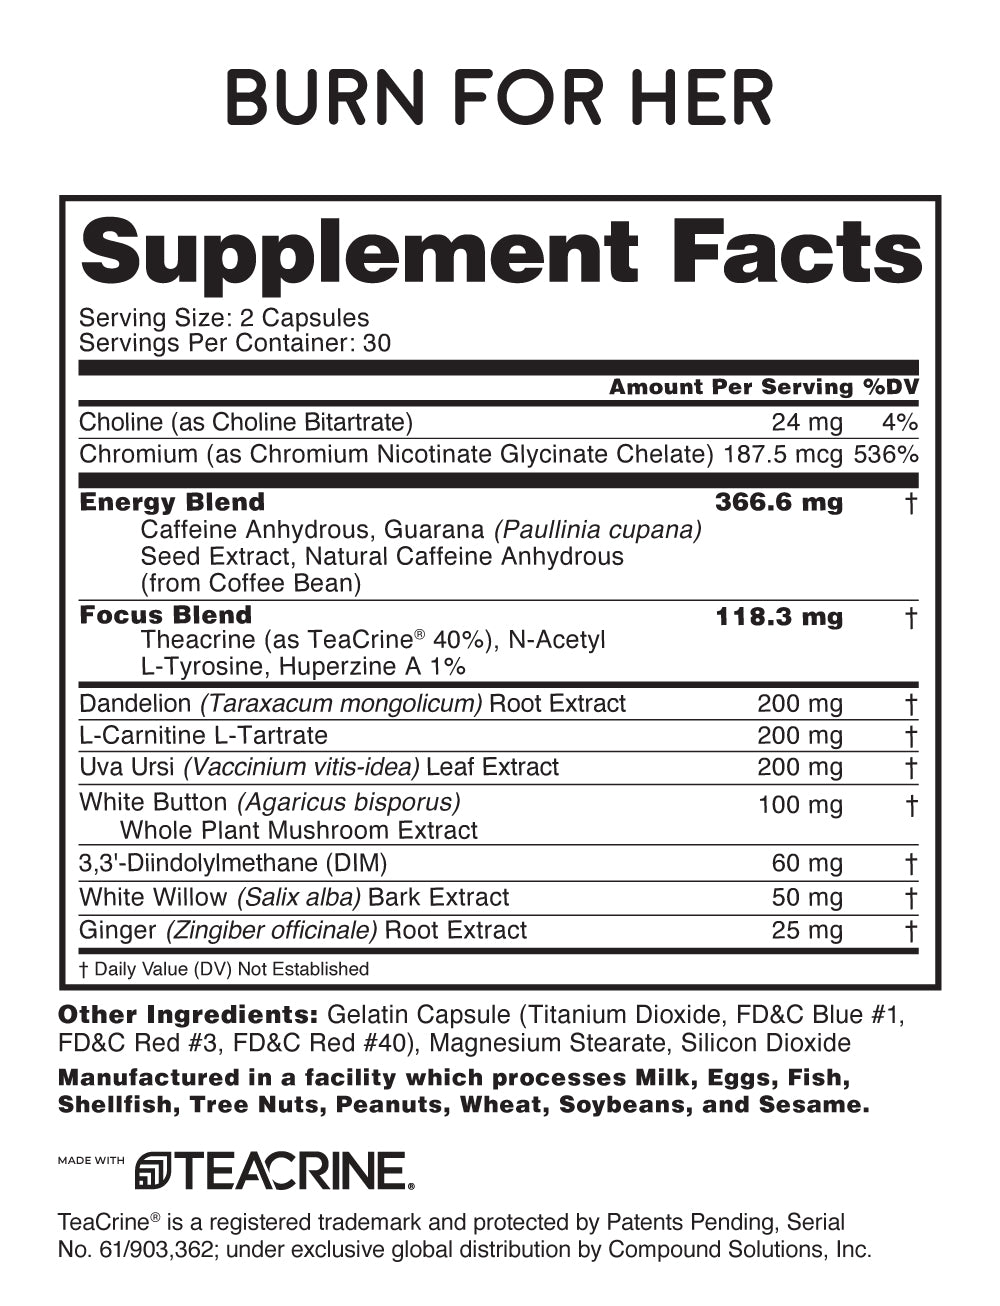 Burn for Her supplement facts